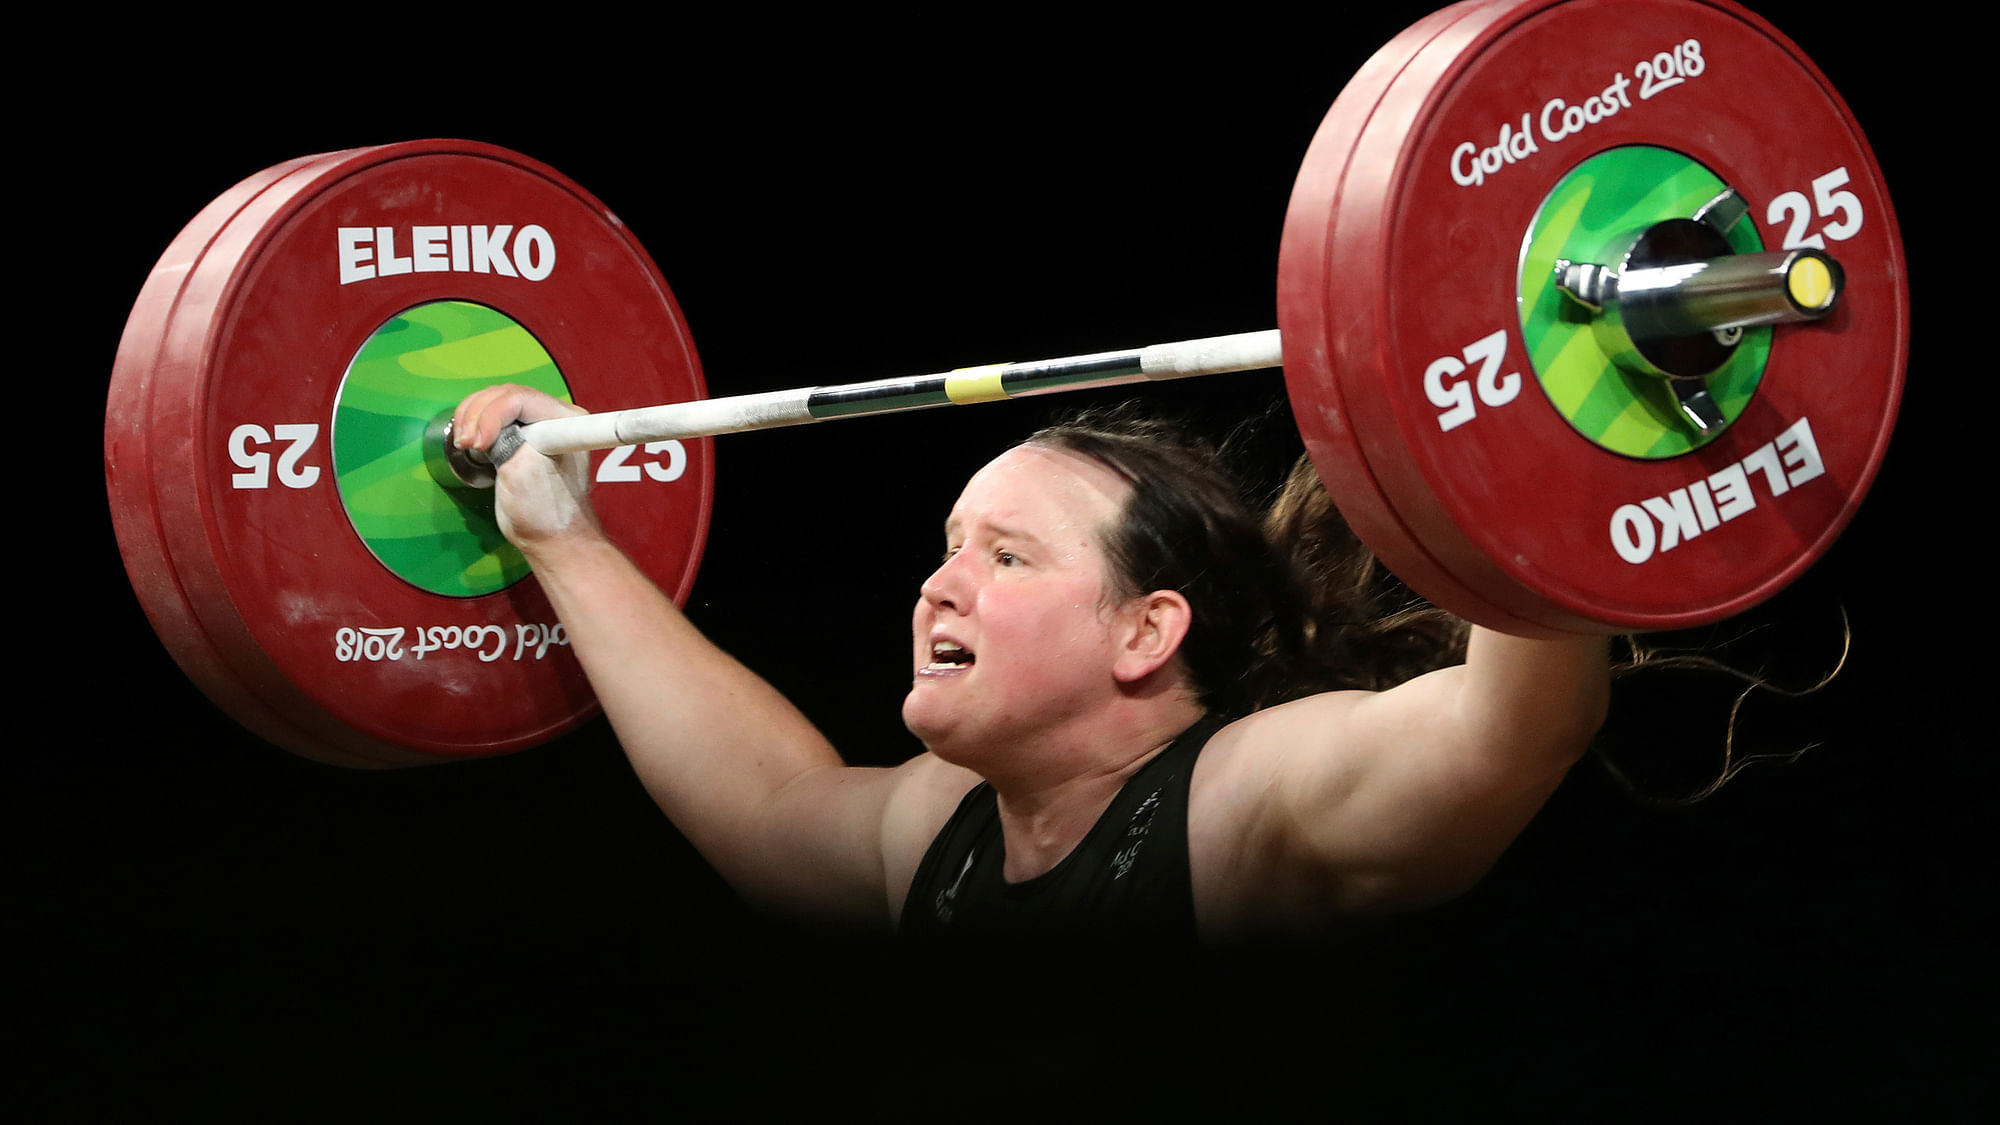 New Zealand’s Laurel Hubbard lifts in the snatch of the women’s +90kg weightlifting final the 2018 Commonwealth Games on the Gold Coast, Australia, Monday, April 9